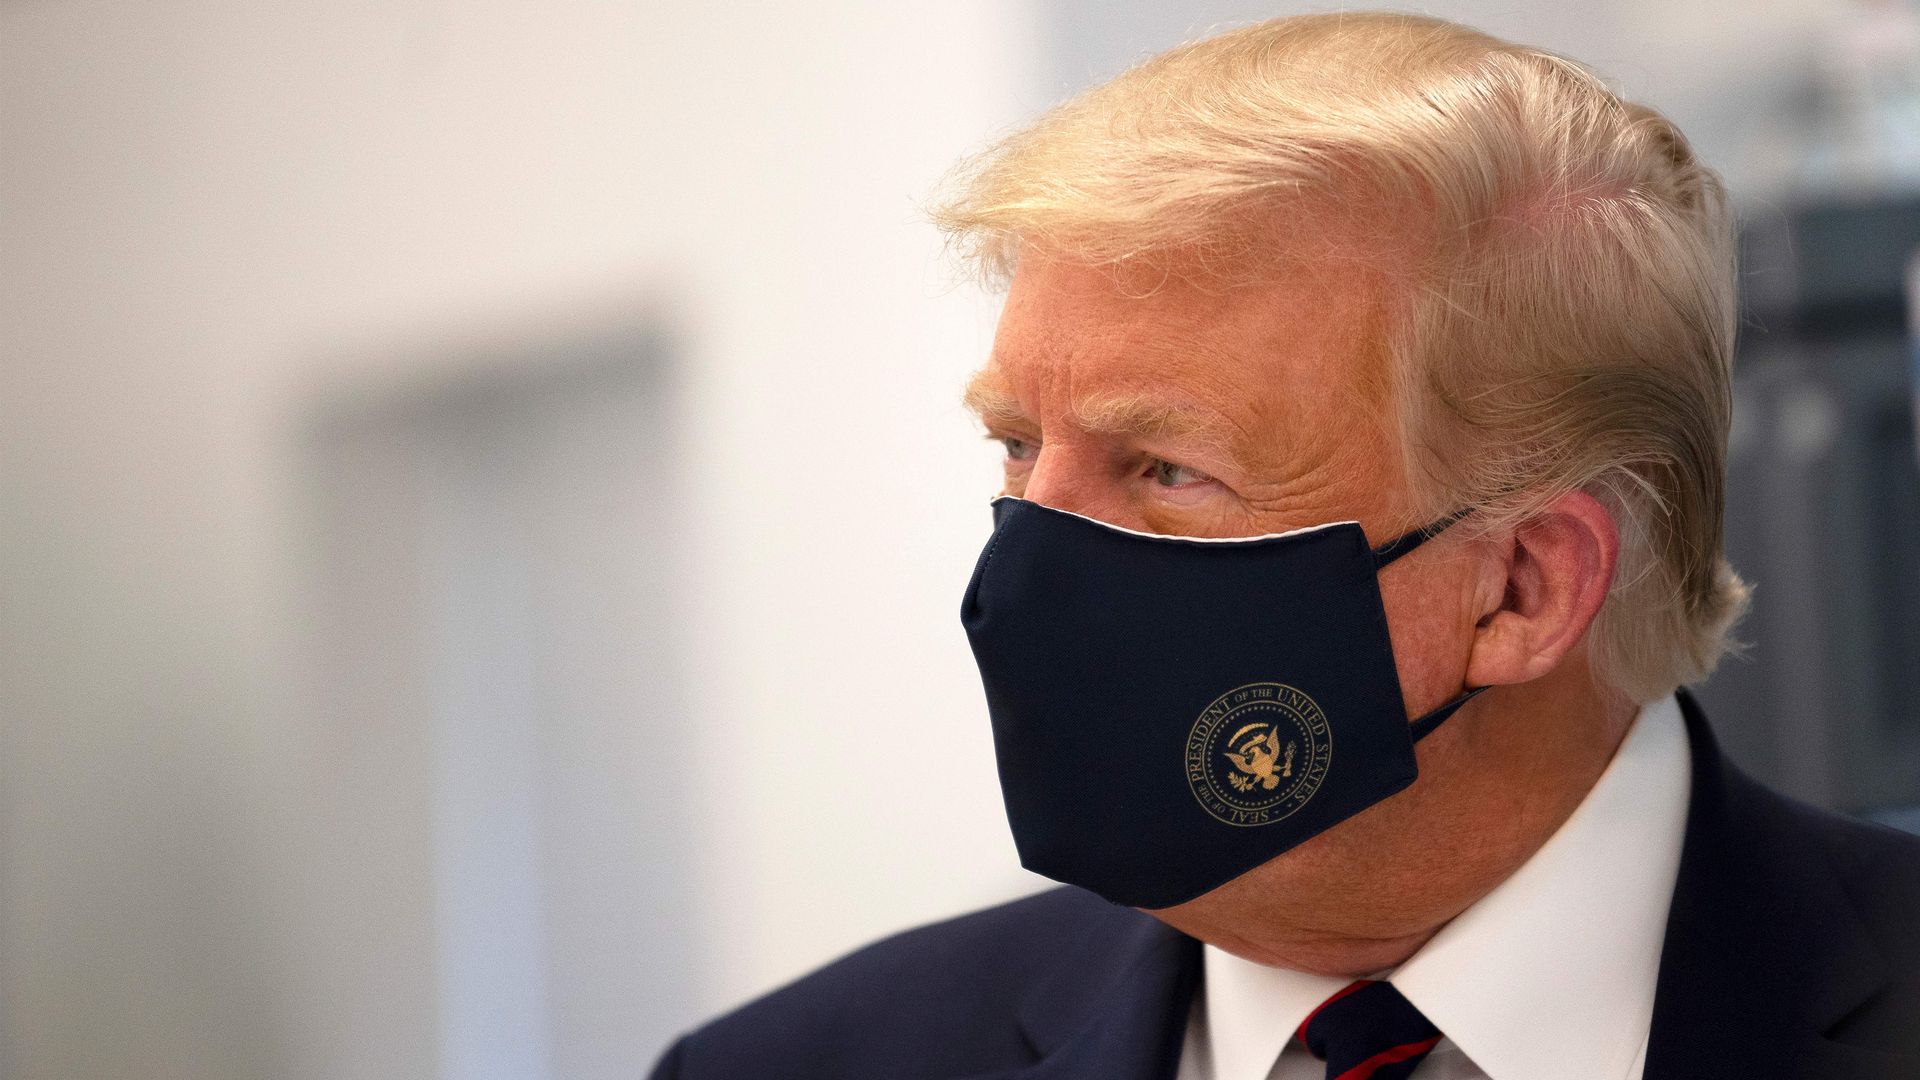 President Trump wearing a black face mask with the presidential seal